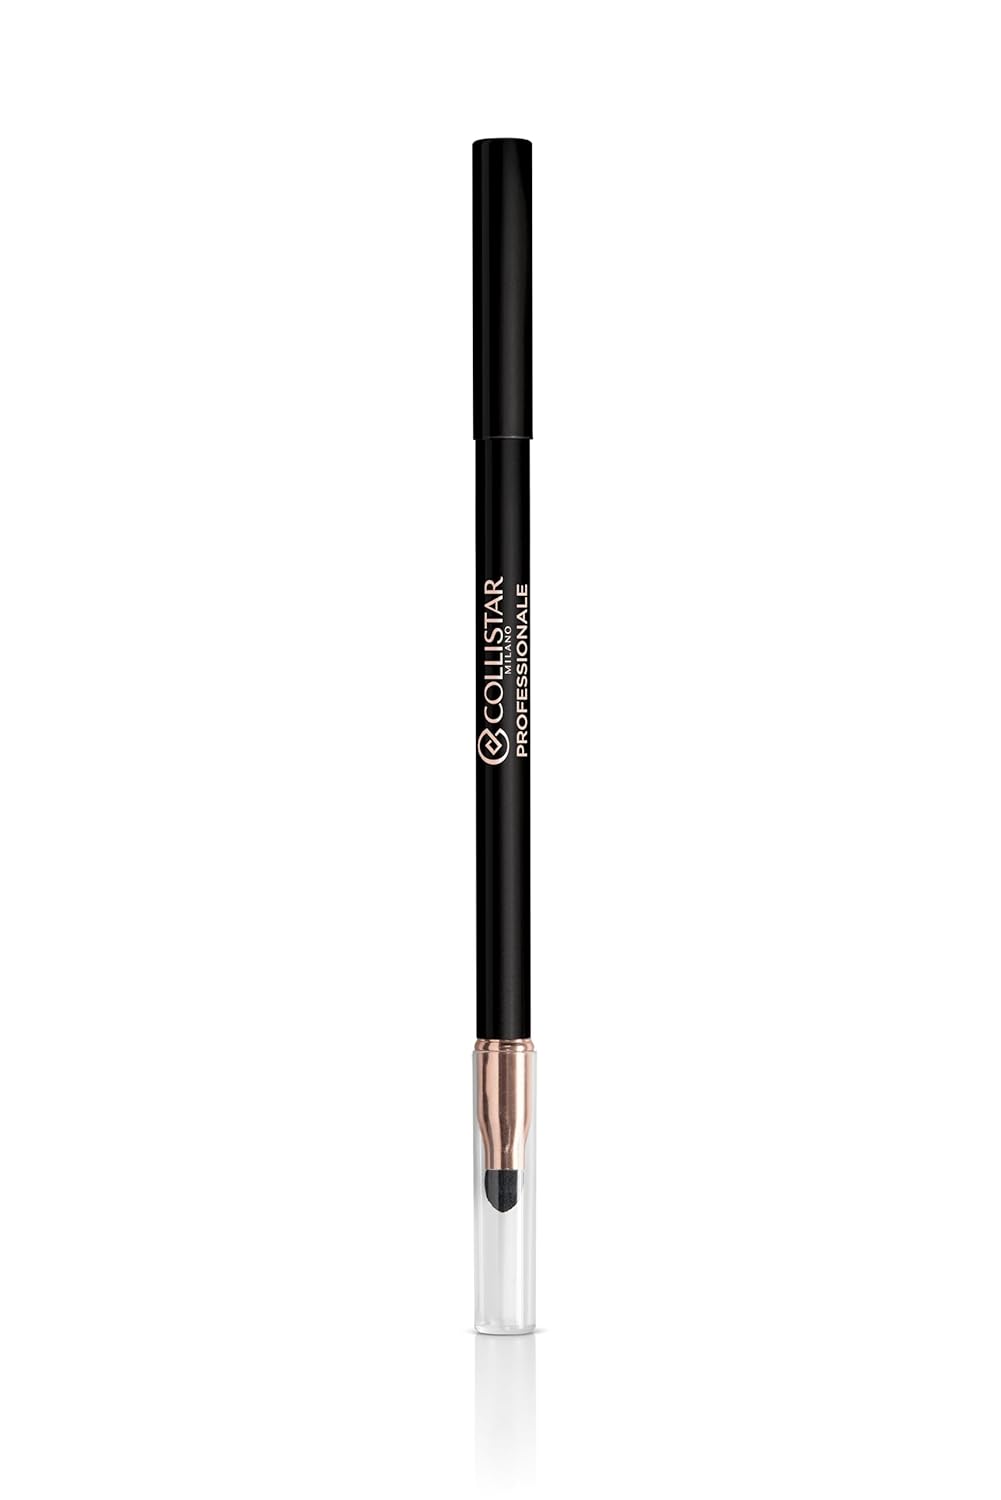 Collistar Professional Eye Pencil, Soft Texture, Easy to Fade, Long Life, Waterproof, 24 Hours, with Applicator, No.1 Black, 1.2ml